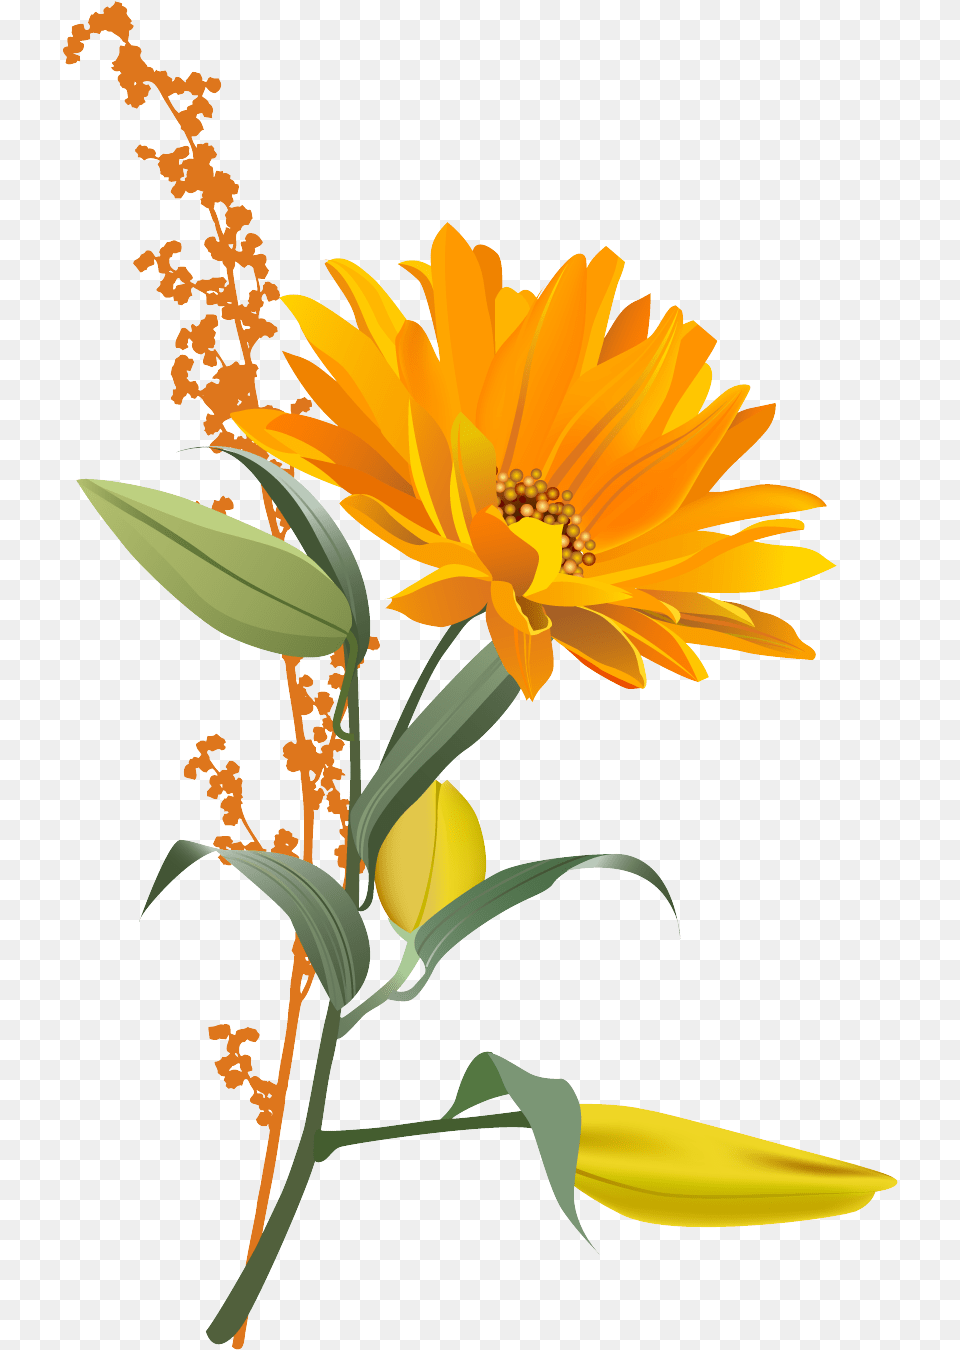 Of Sunflower Icon Clipart Background Orange Flower, Plant, Petal, Anther, Daisy Free Transparent Png